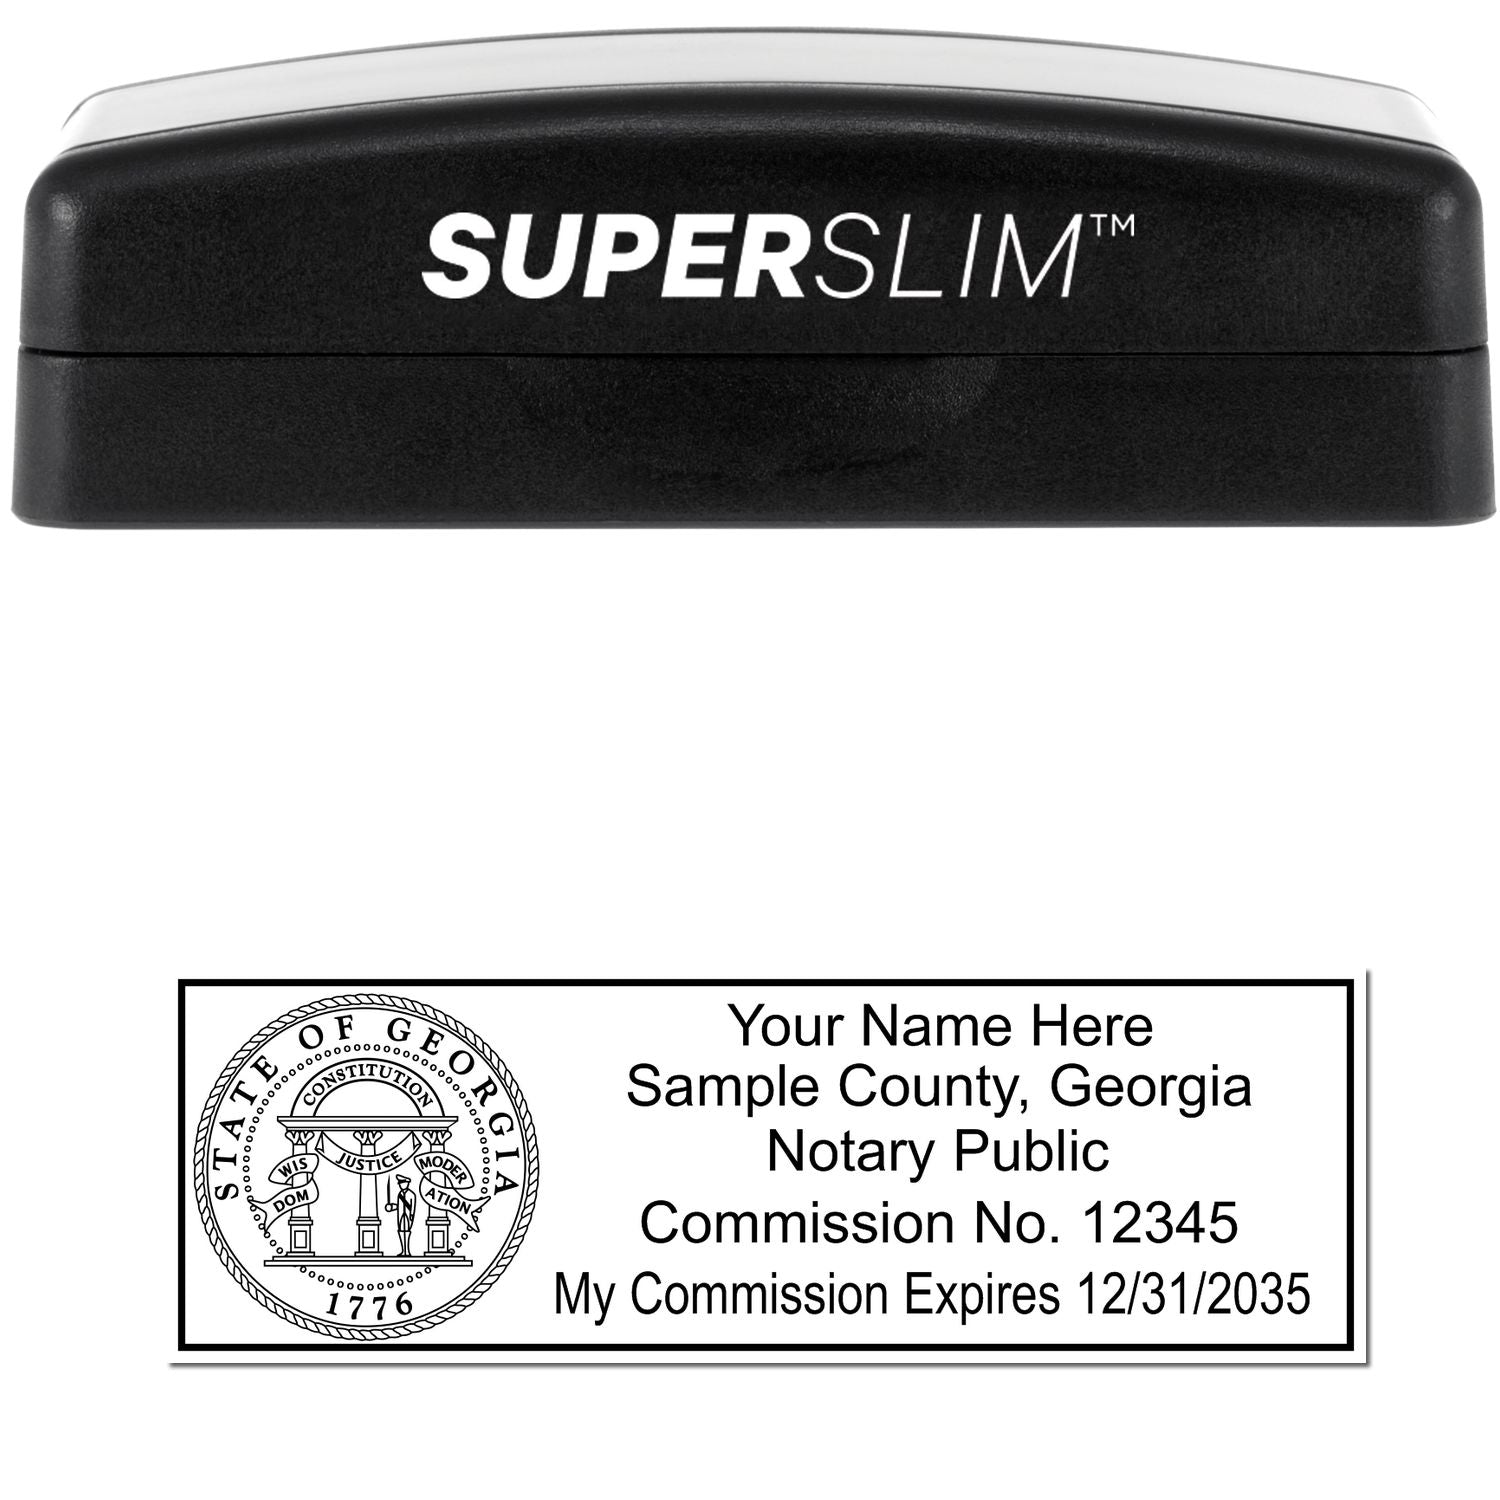 The main image for the Super Slim Georgia Notary Public Stamp depicting a sample of the imprint and electronic files